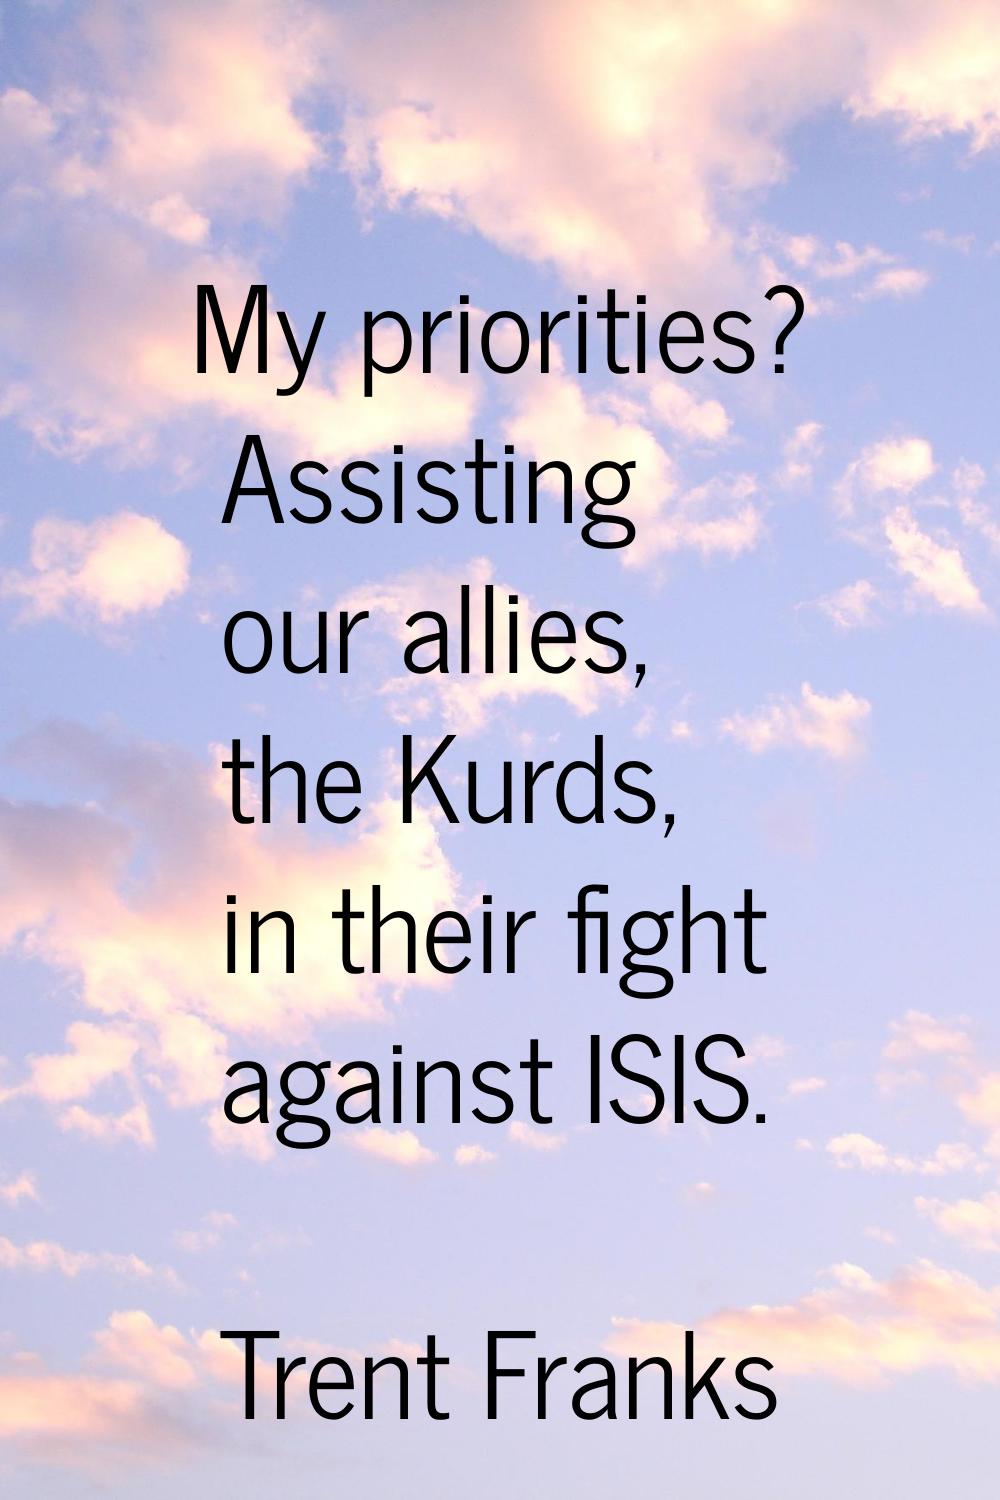 My priorities? Assisting our allies, the Kurds, in their fight against ISIS.